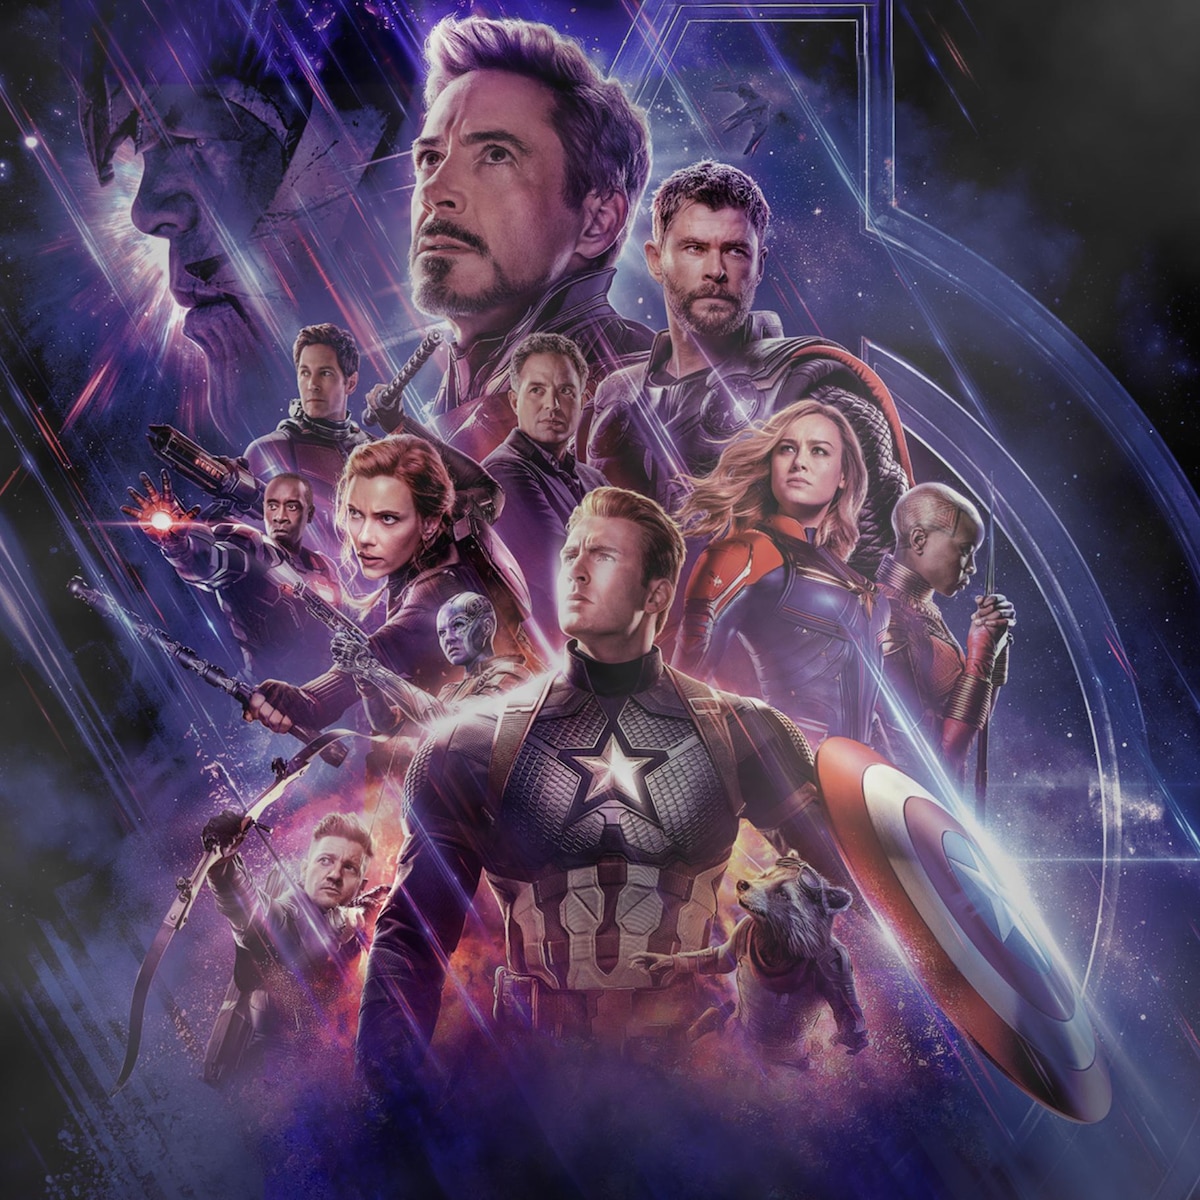 Avengers:Endgame(with music and light)